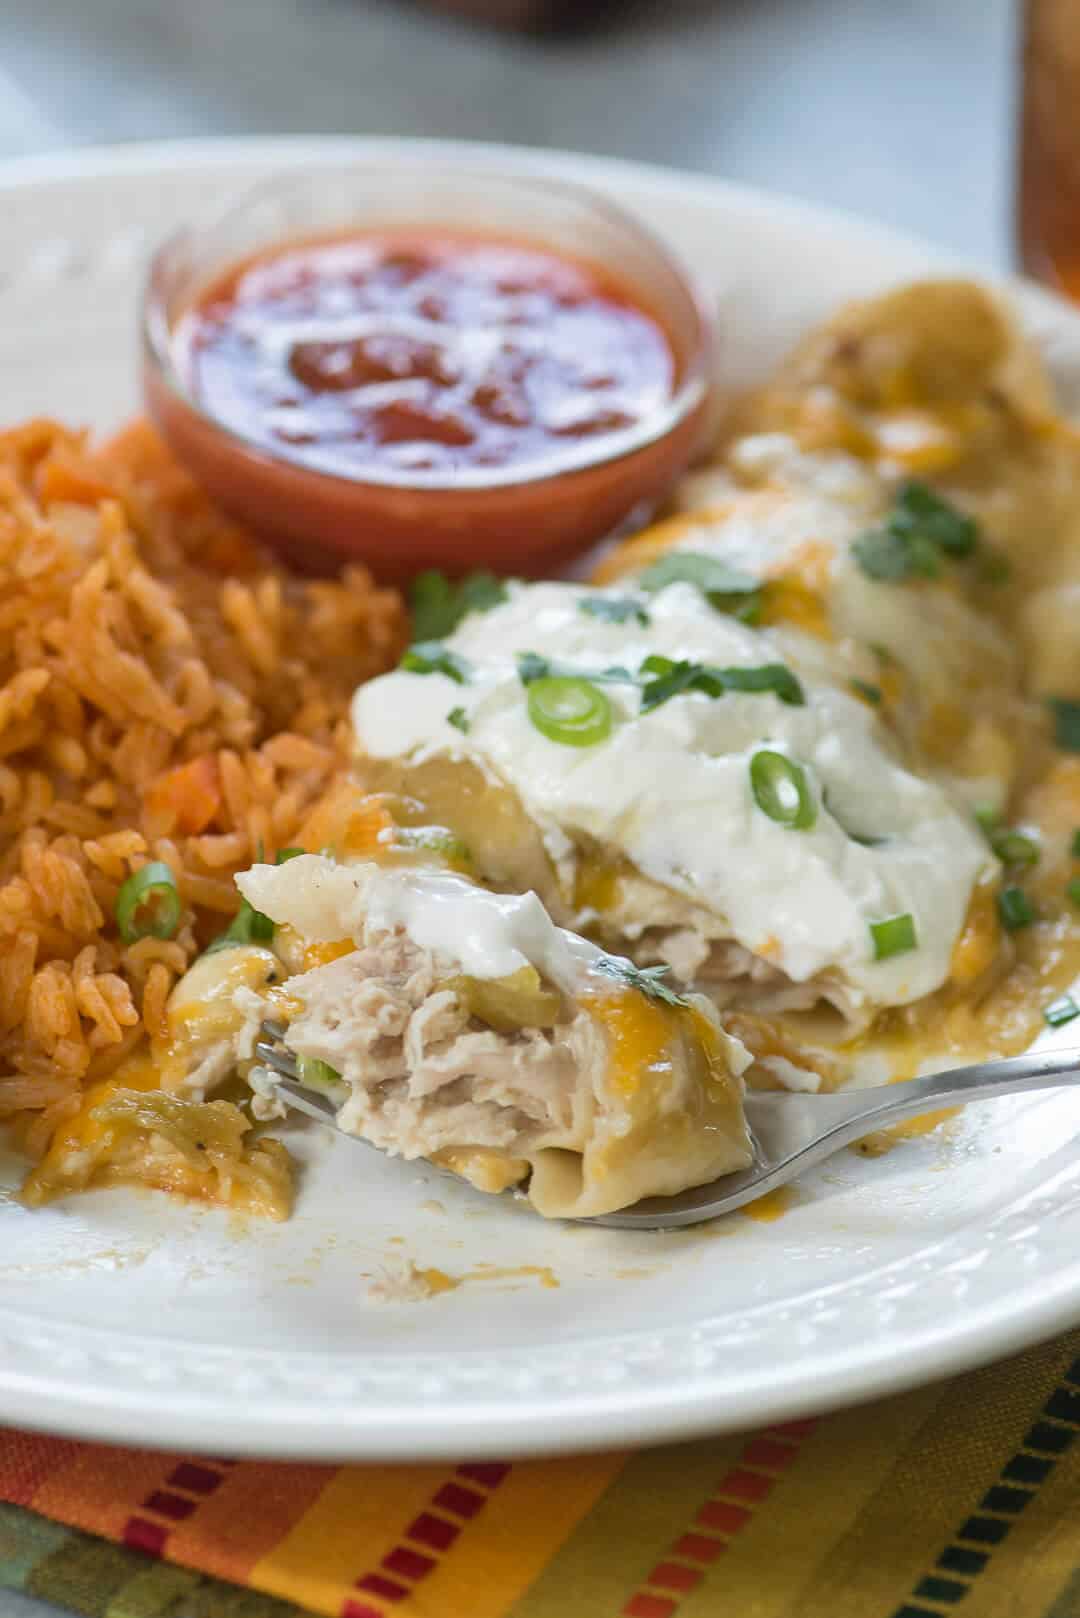 A fork breaking into a burrito on a white plate.